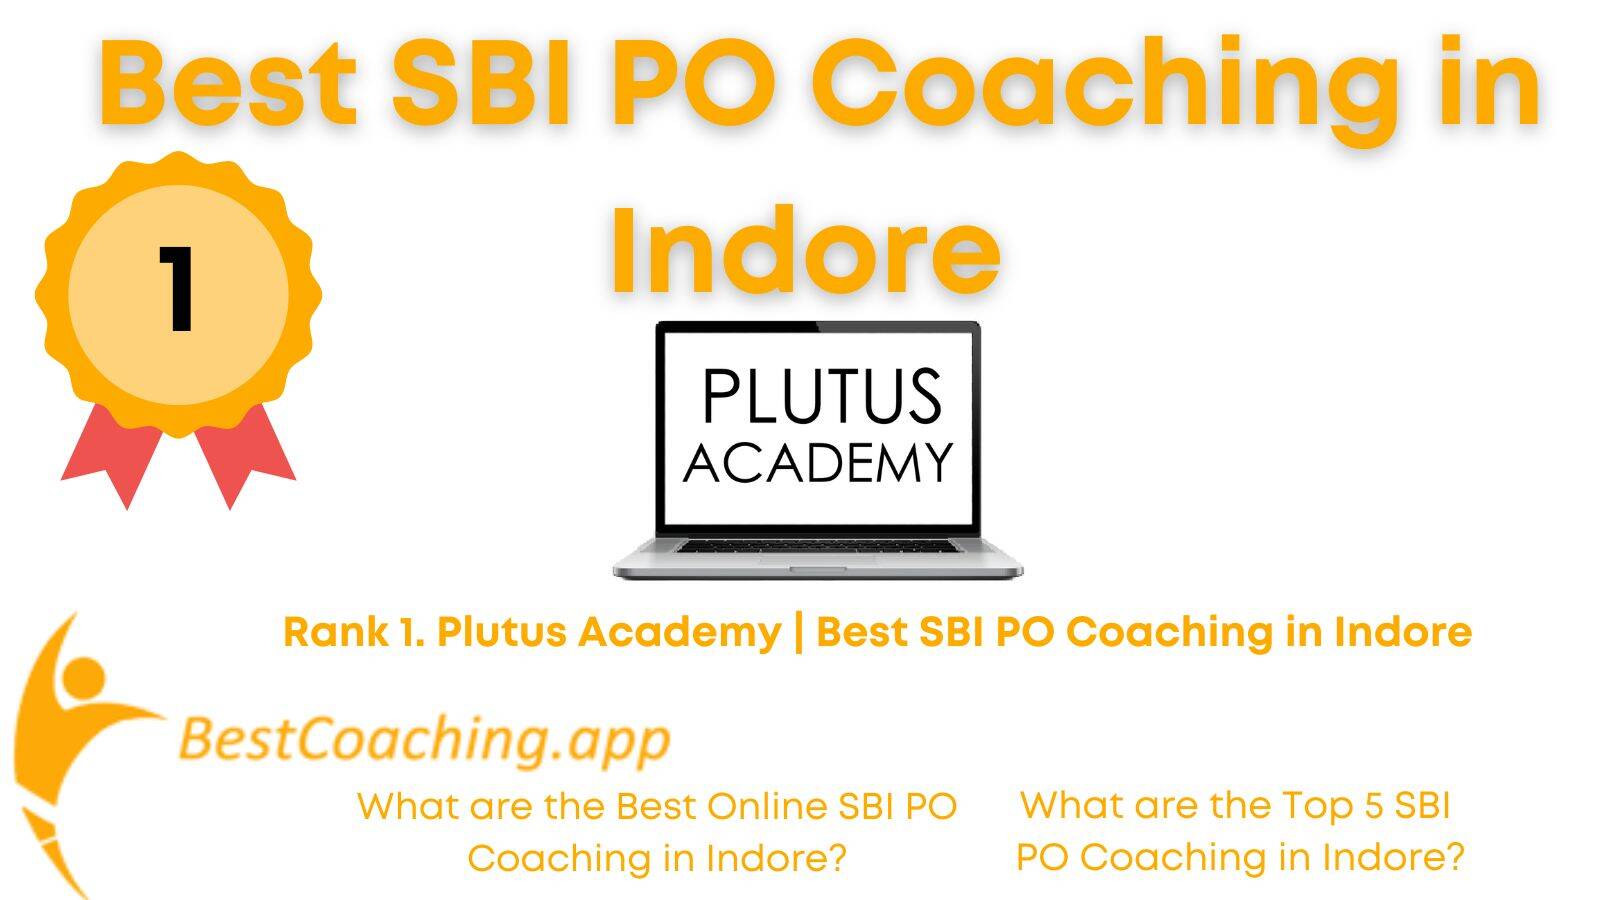    Rank 1. Plutus Academy | Best SBI PO Coaching in Indore